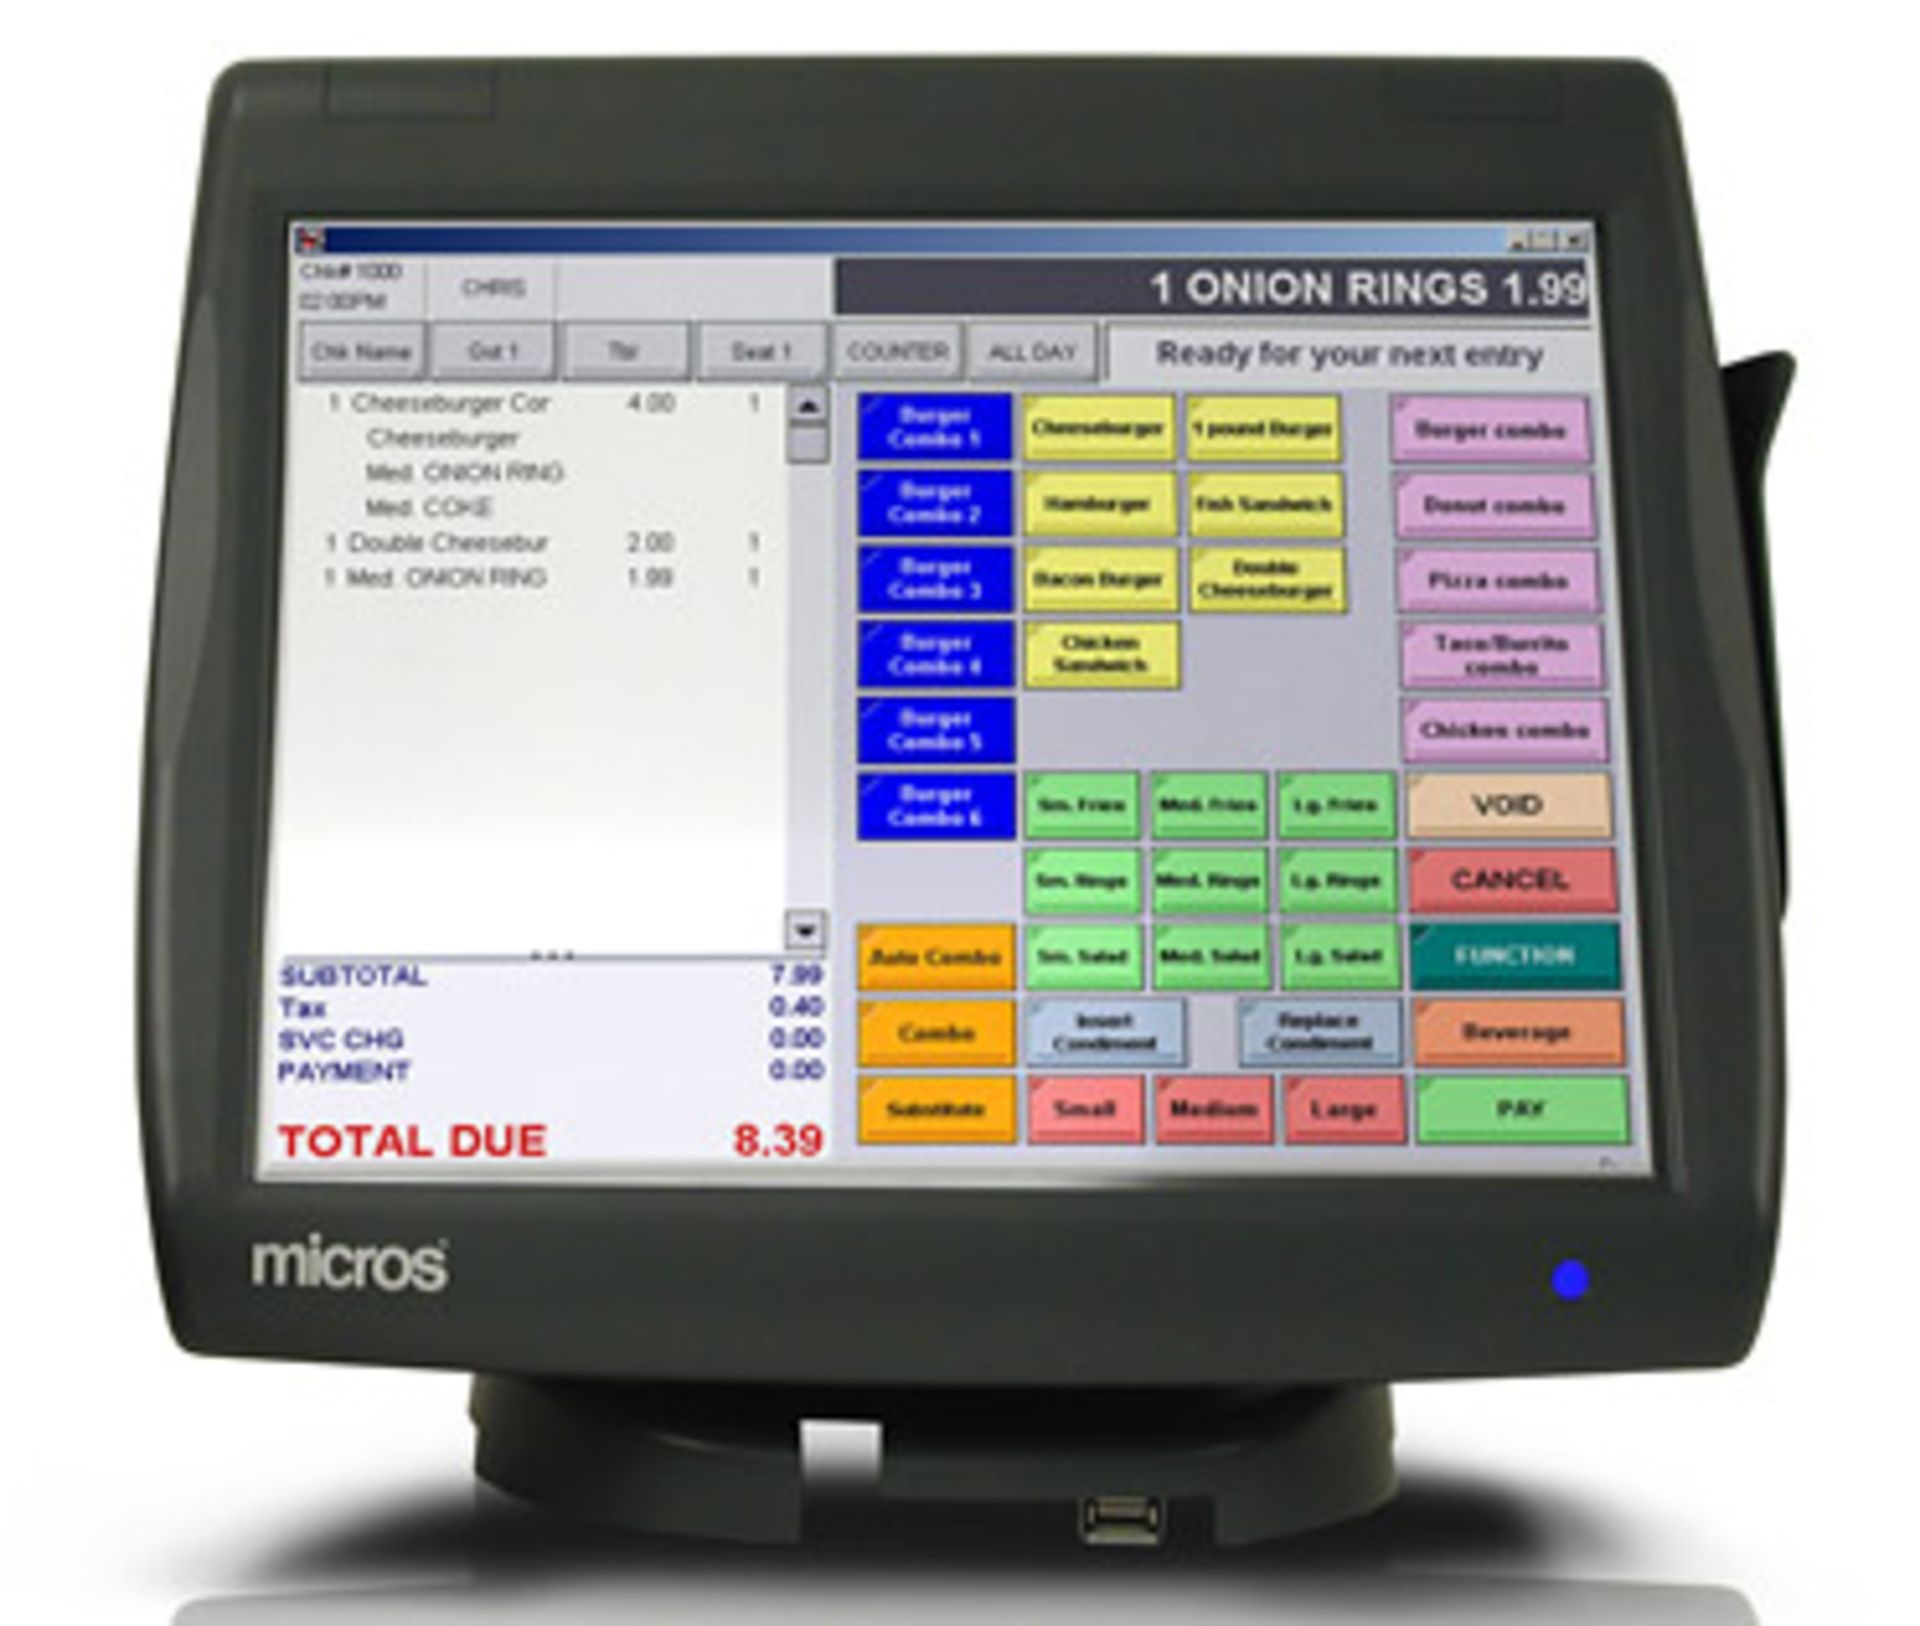 Micros Workstation 5A -400814-001 EPOS system 256 MB Compact Flash – Standard for Win CE